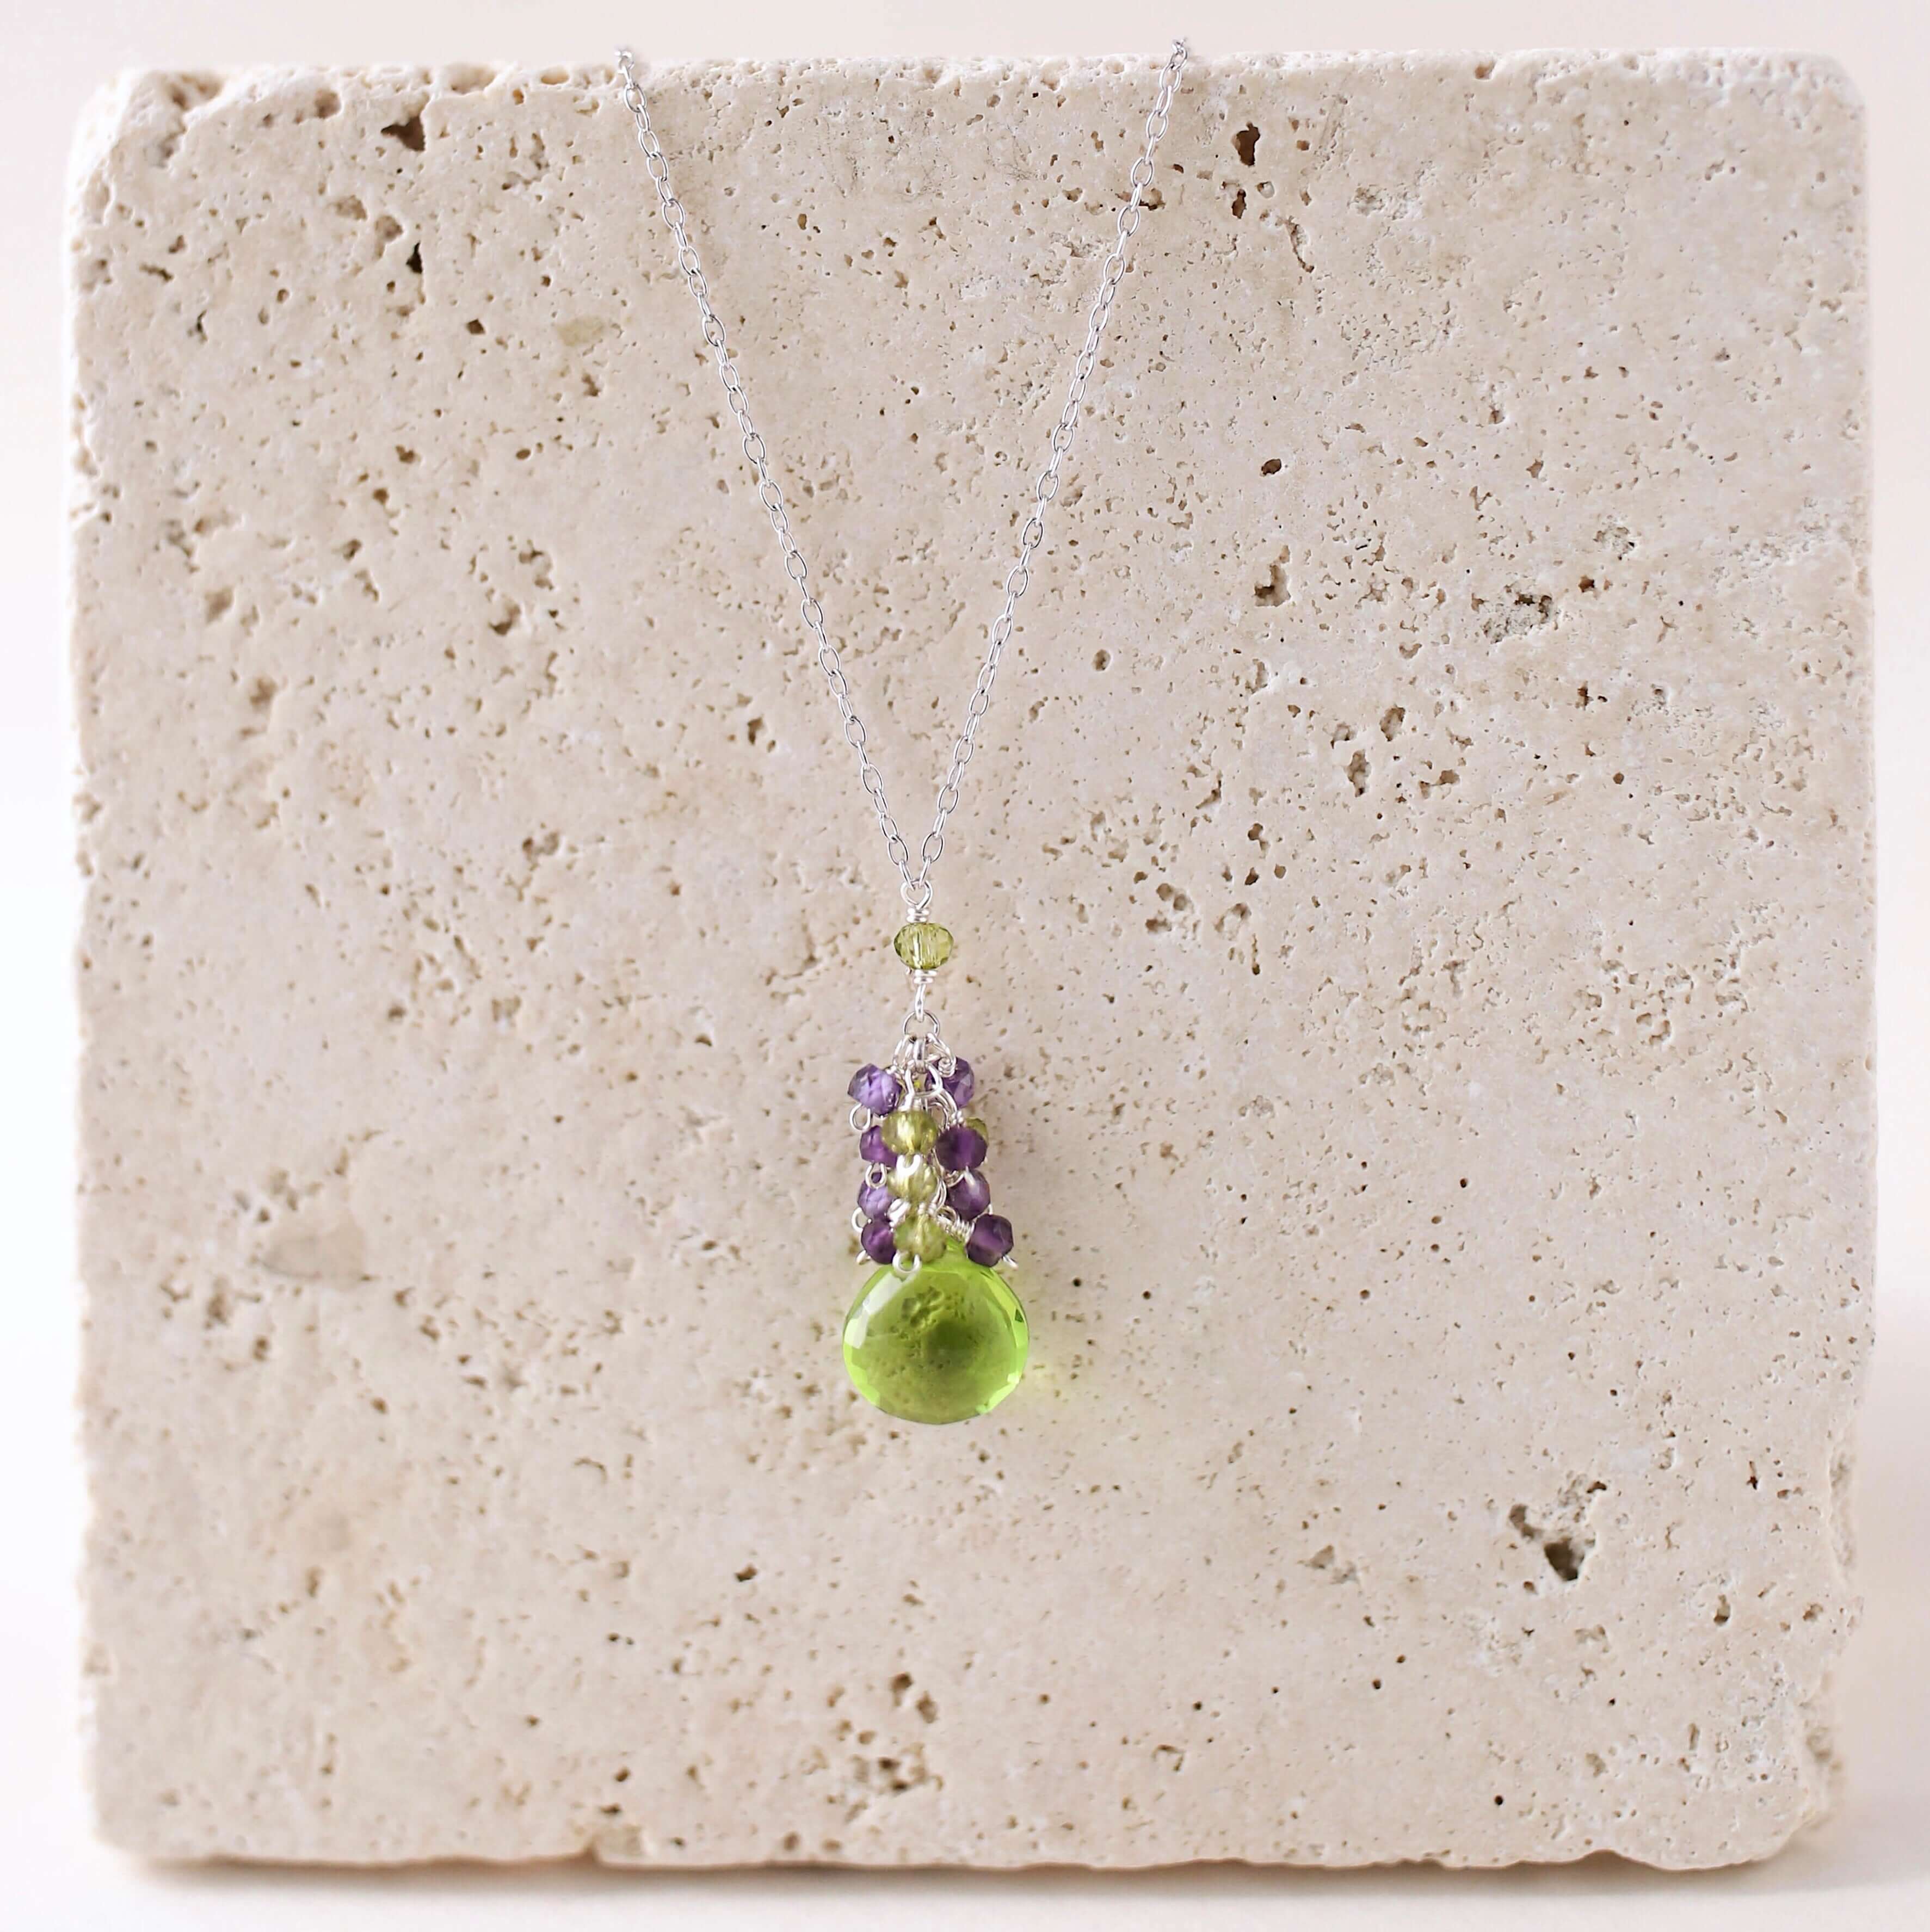 Gorgeous Raindrop Necklace  with  Peridot Quartz Gemstone paired with Amethyst gemstones accent 